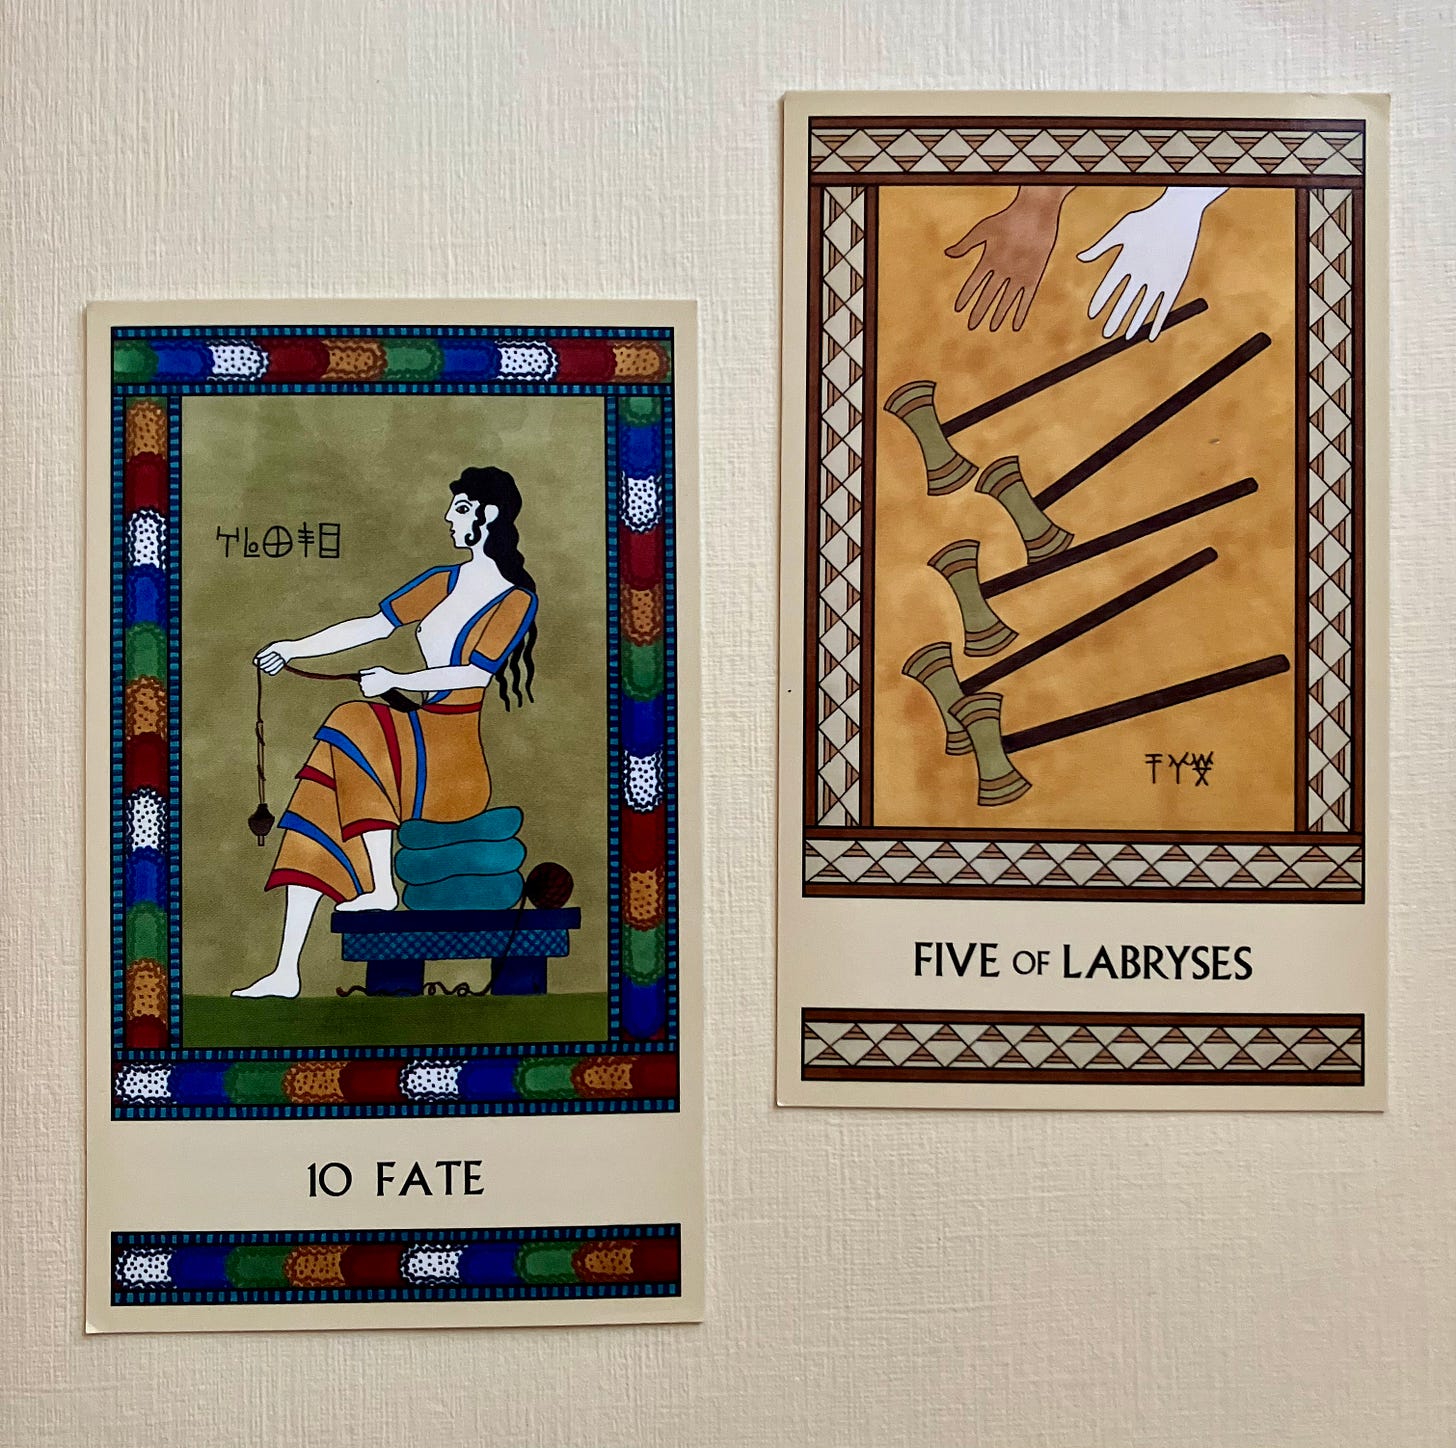 Two Minoan Tarot cards side by side on a cream background. The Fate card has a multicolor border. It pictures a Minoan woman seated on a pile of cushions, facing left, holding a drop spindle as she spins thread. The Five of Labryses is in shades of gold and tan. It shows two hands letting go of five labryses, allowing them to fall through the air.